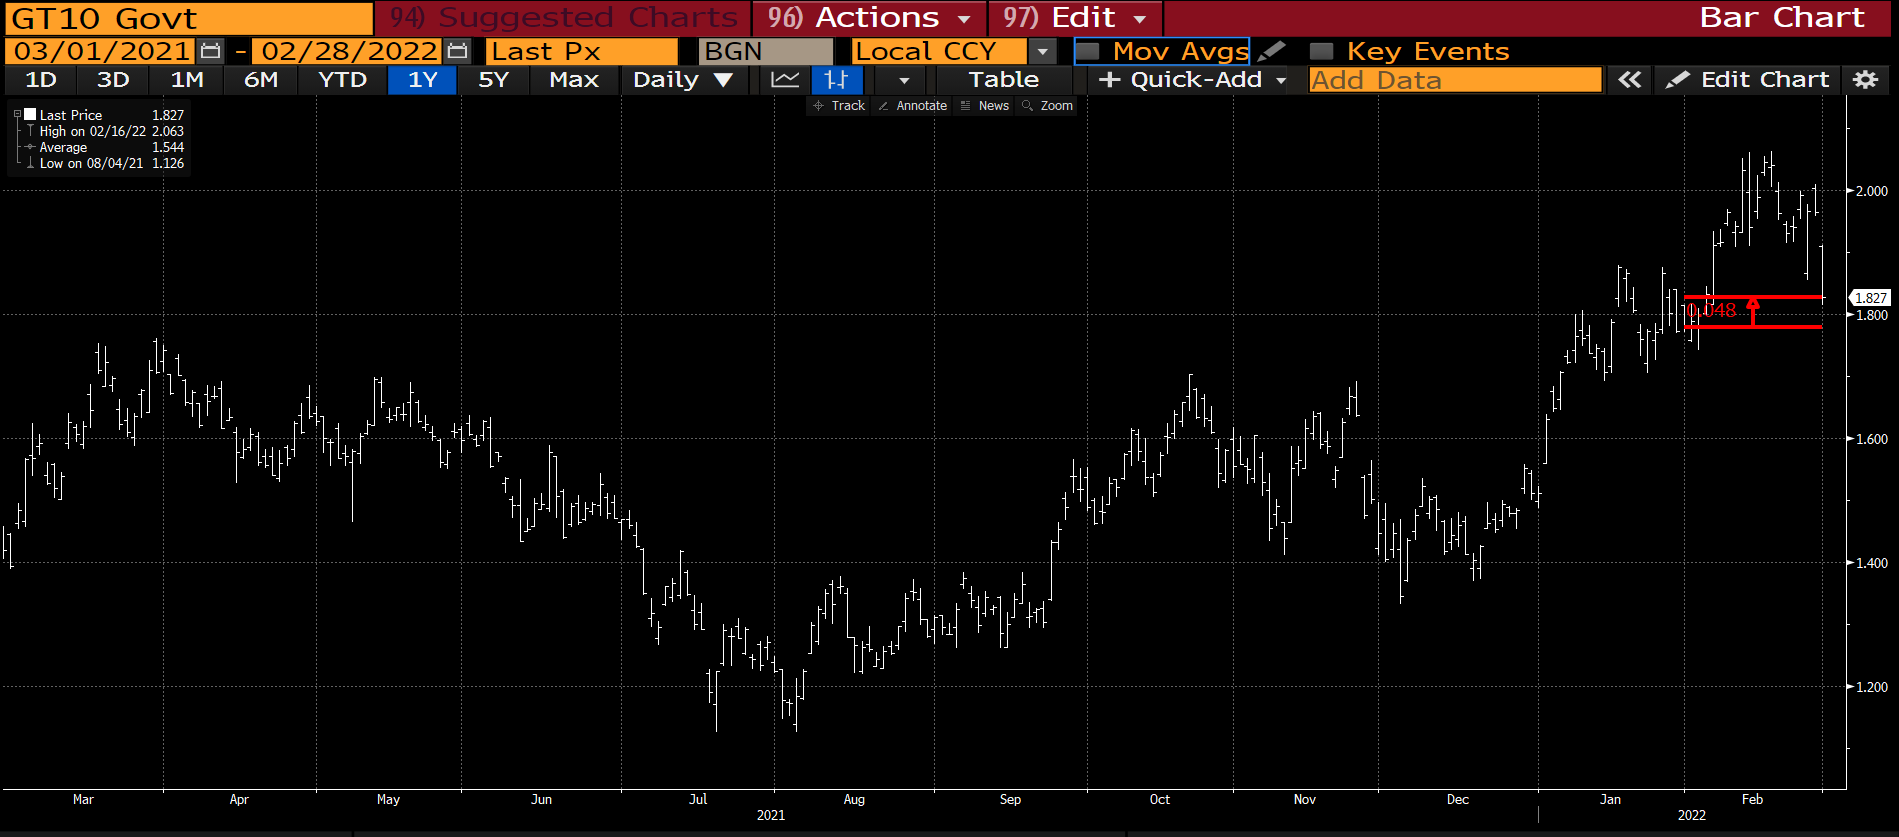 Exhibit 2: Bond Yields Increase But Close Well Below the Highs